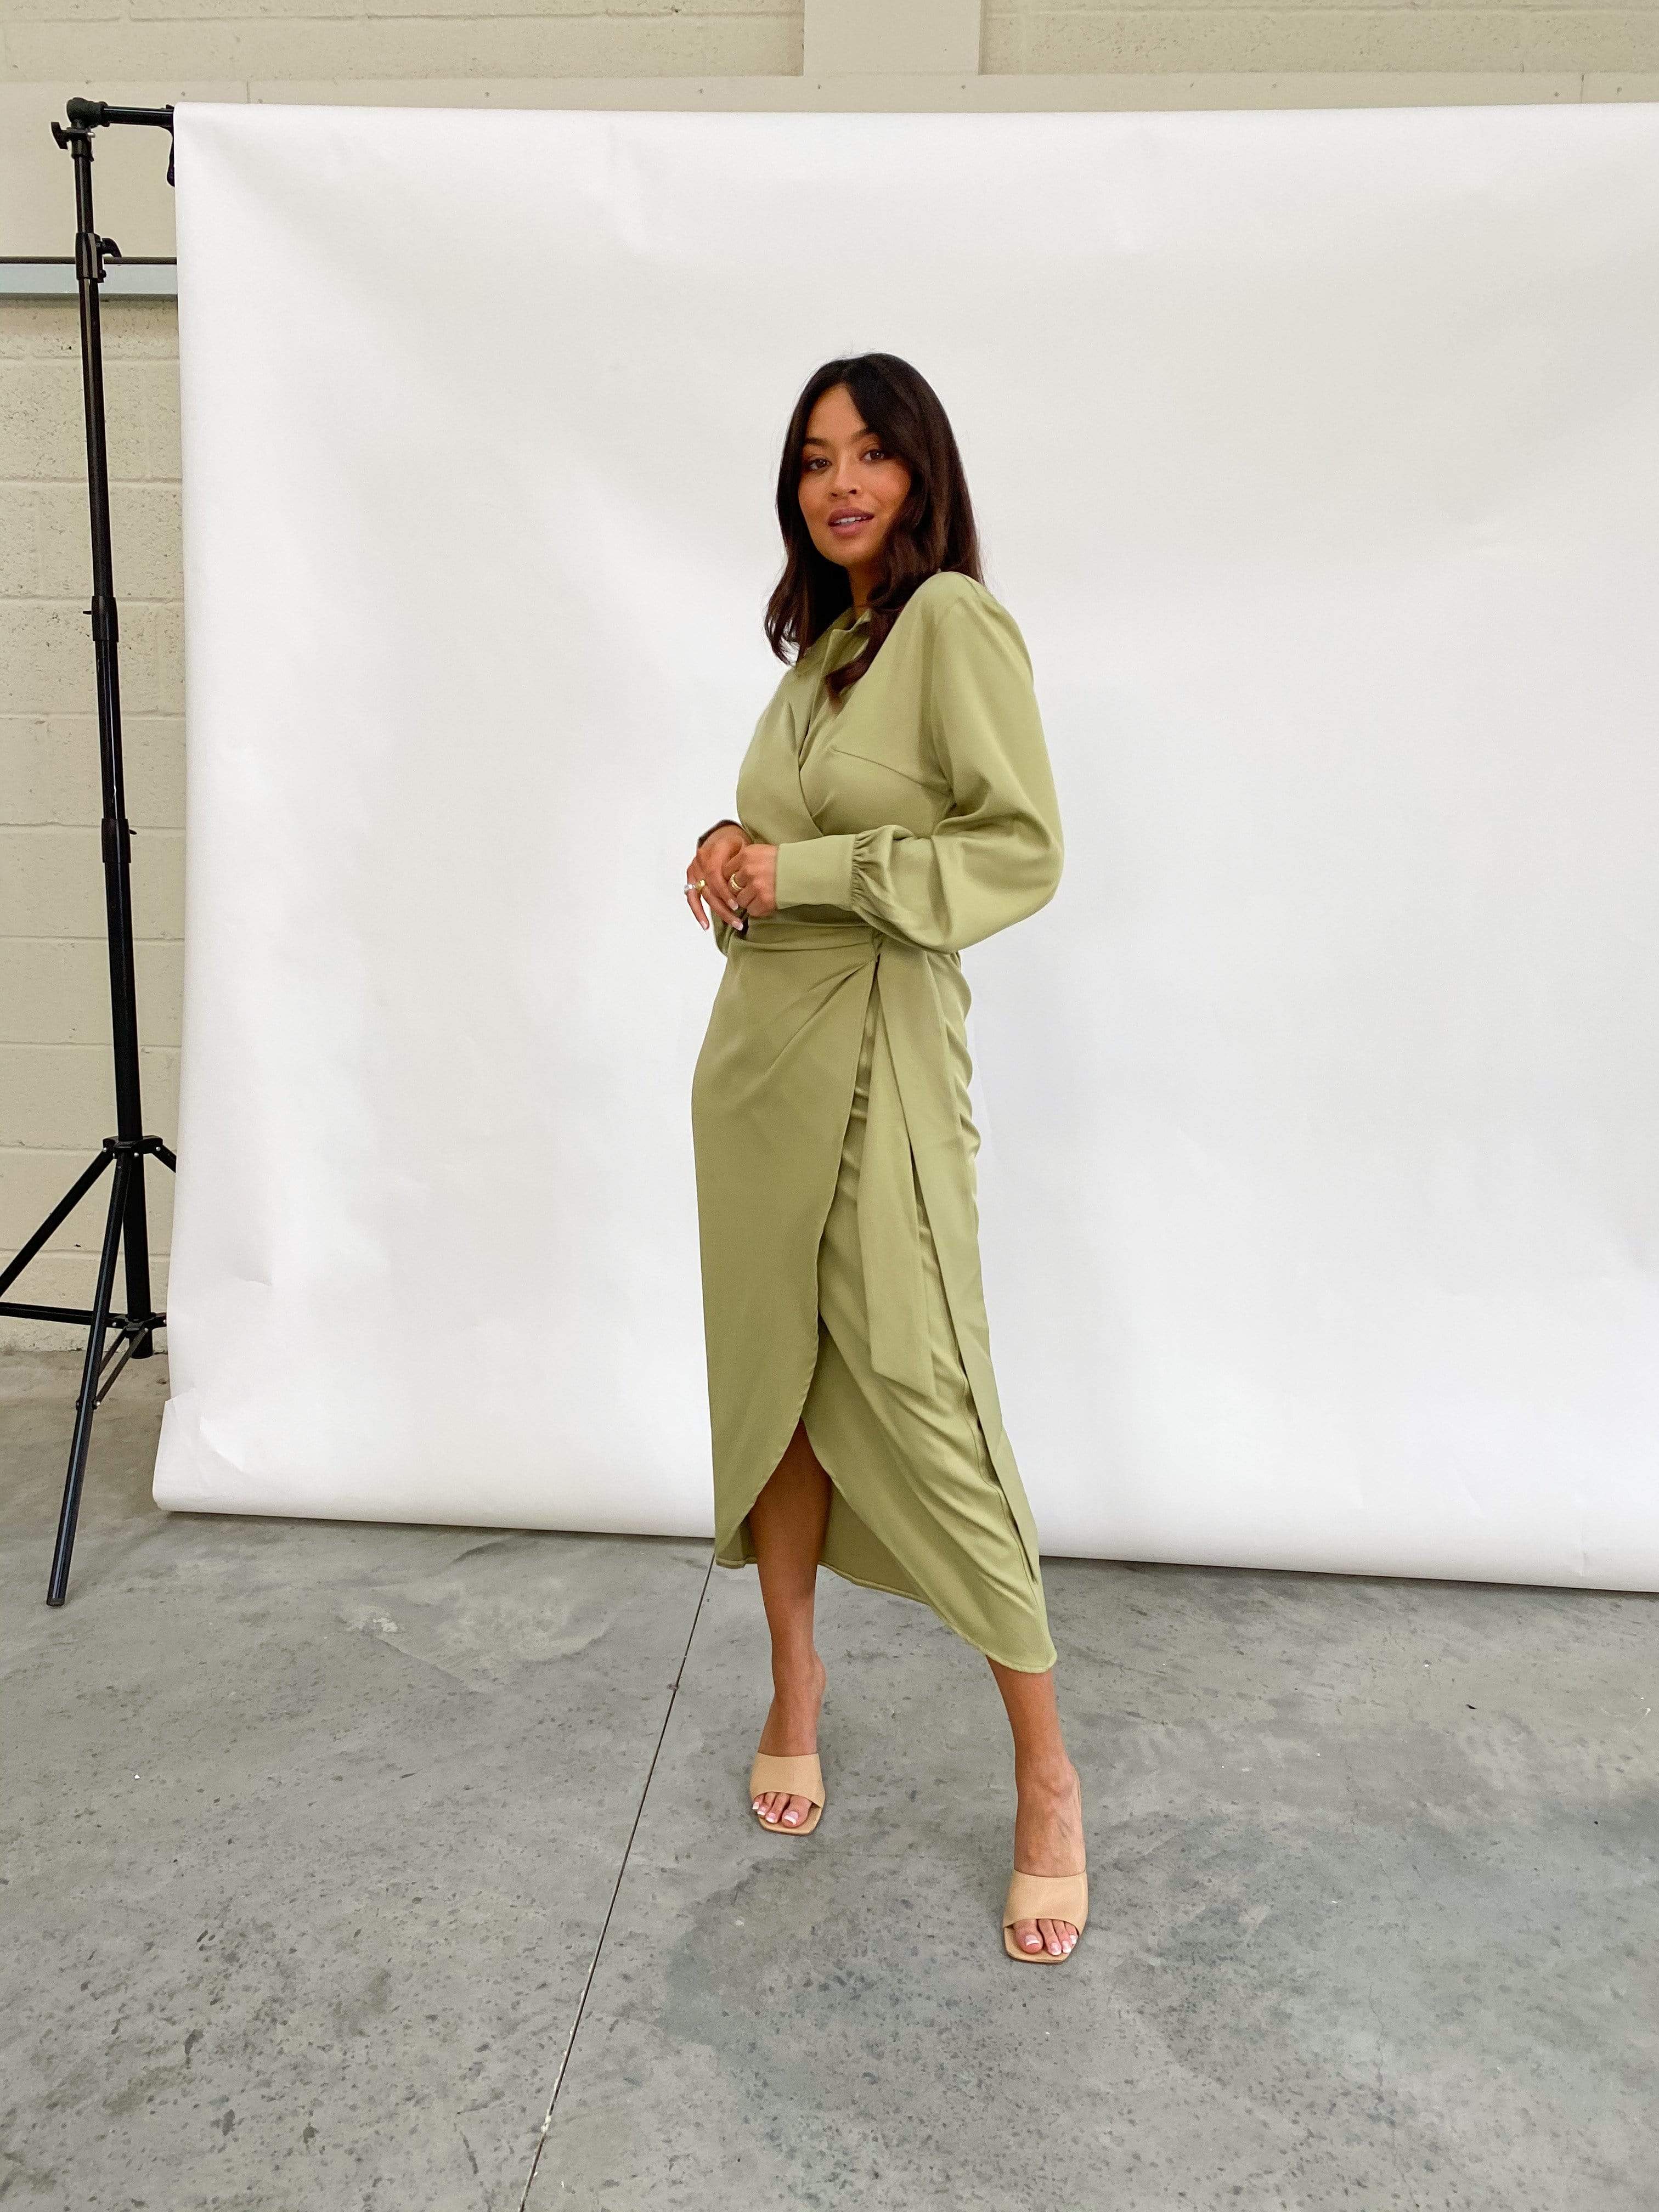 Rochelle Humes Green Wrap Dress This Morning January 2021 – Fashion You  Really Want